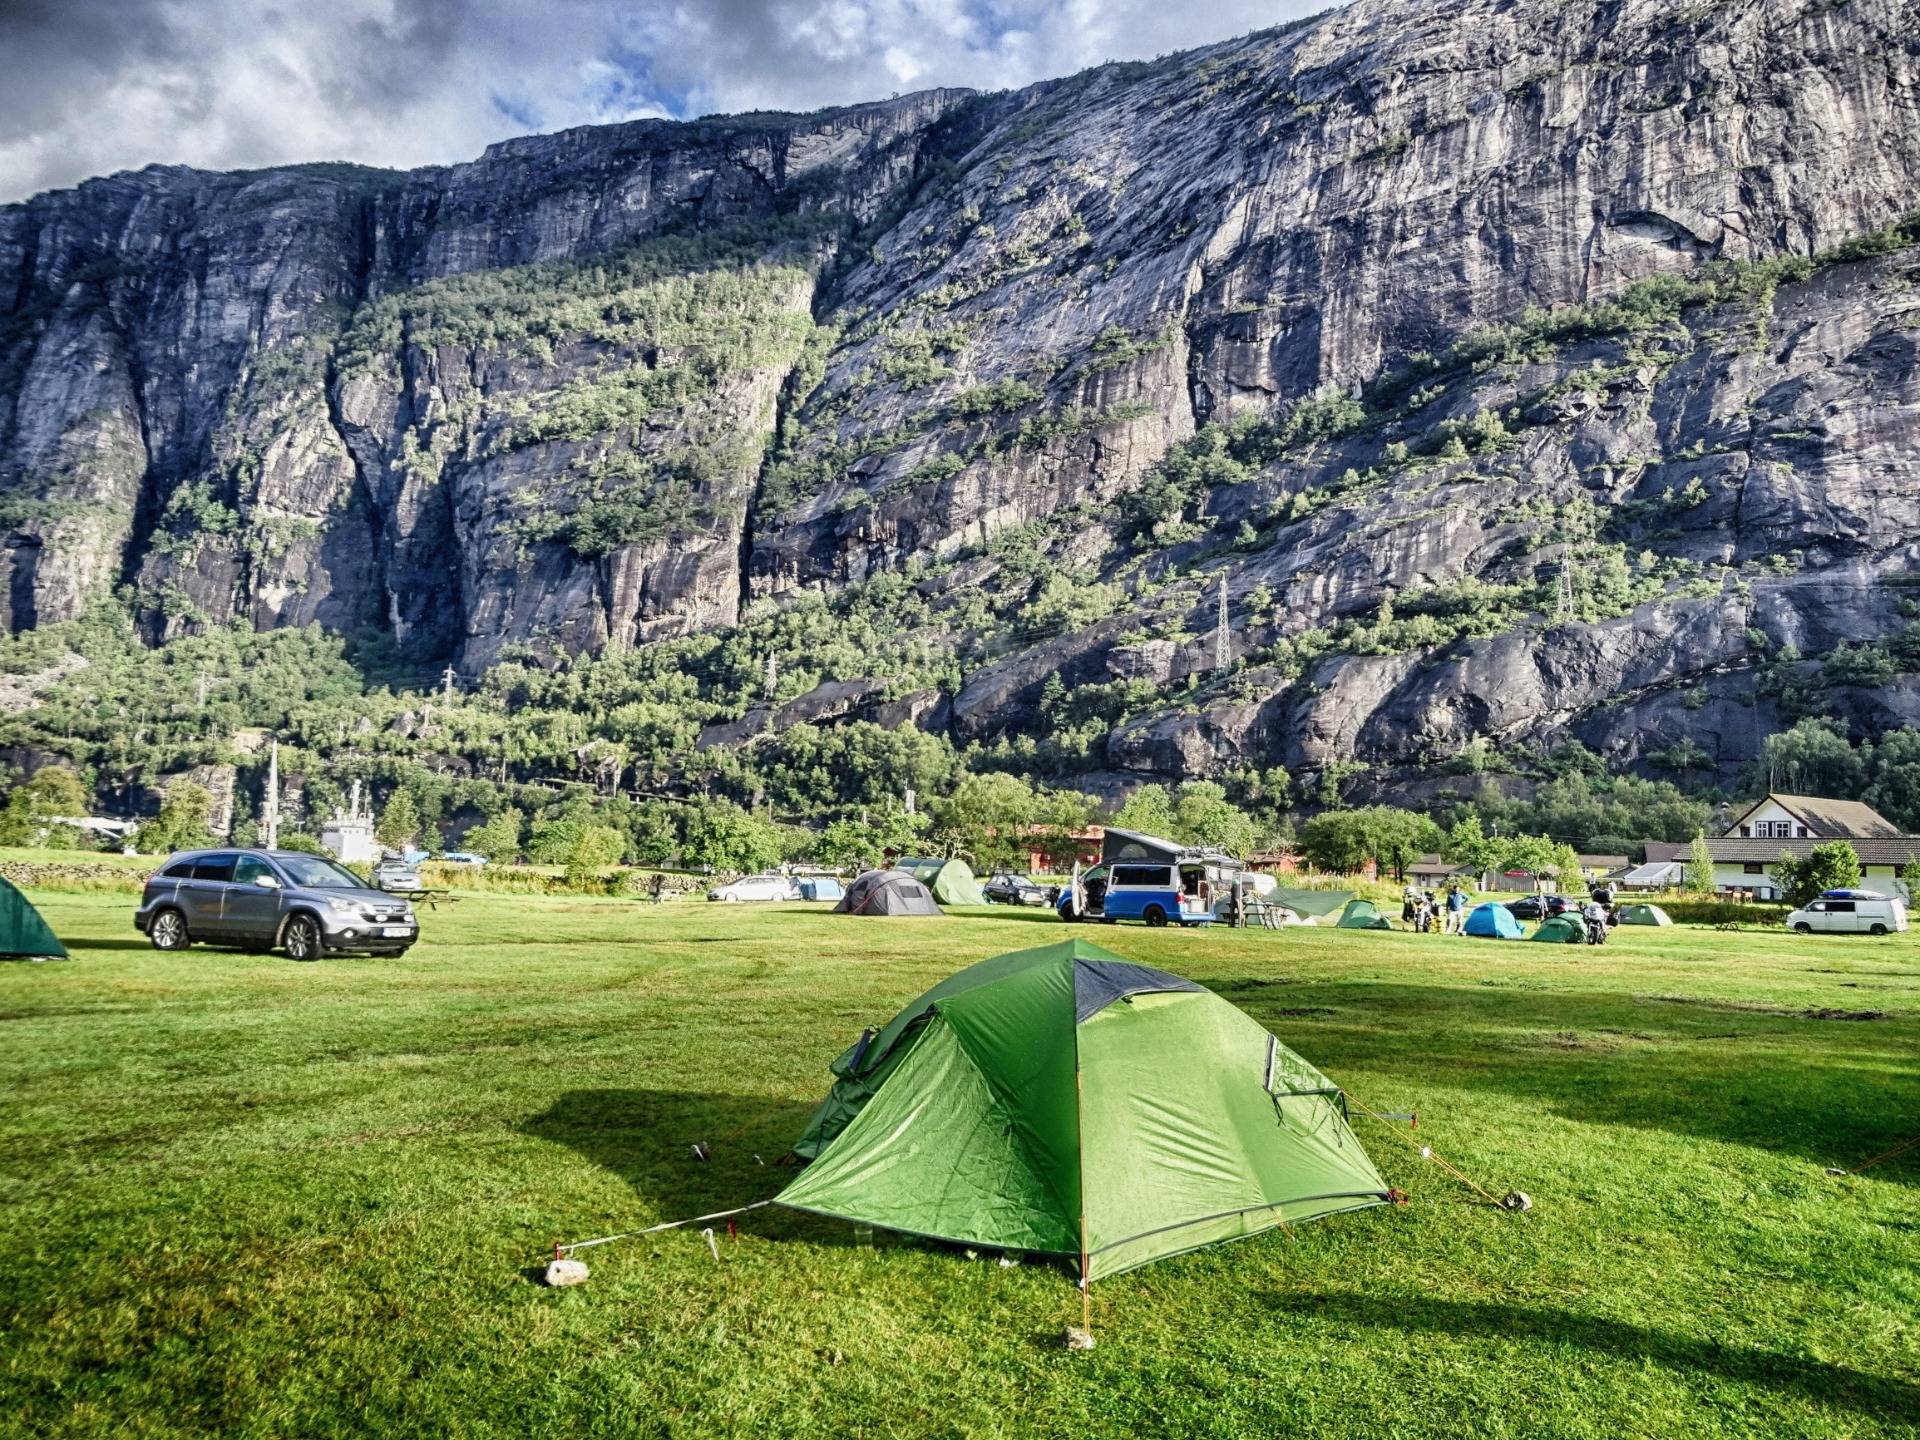 The Lysebotn camping site